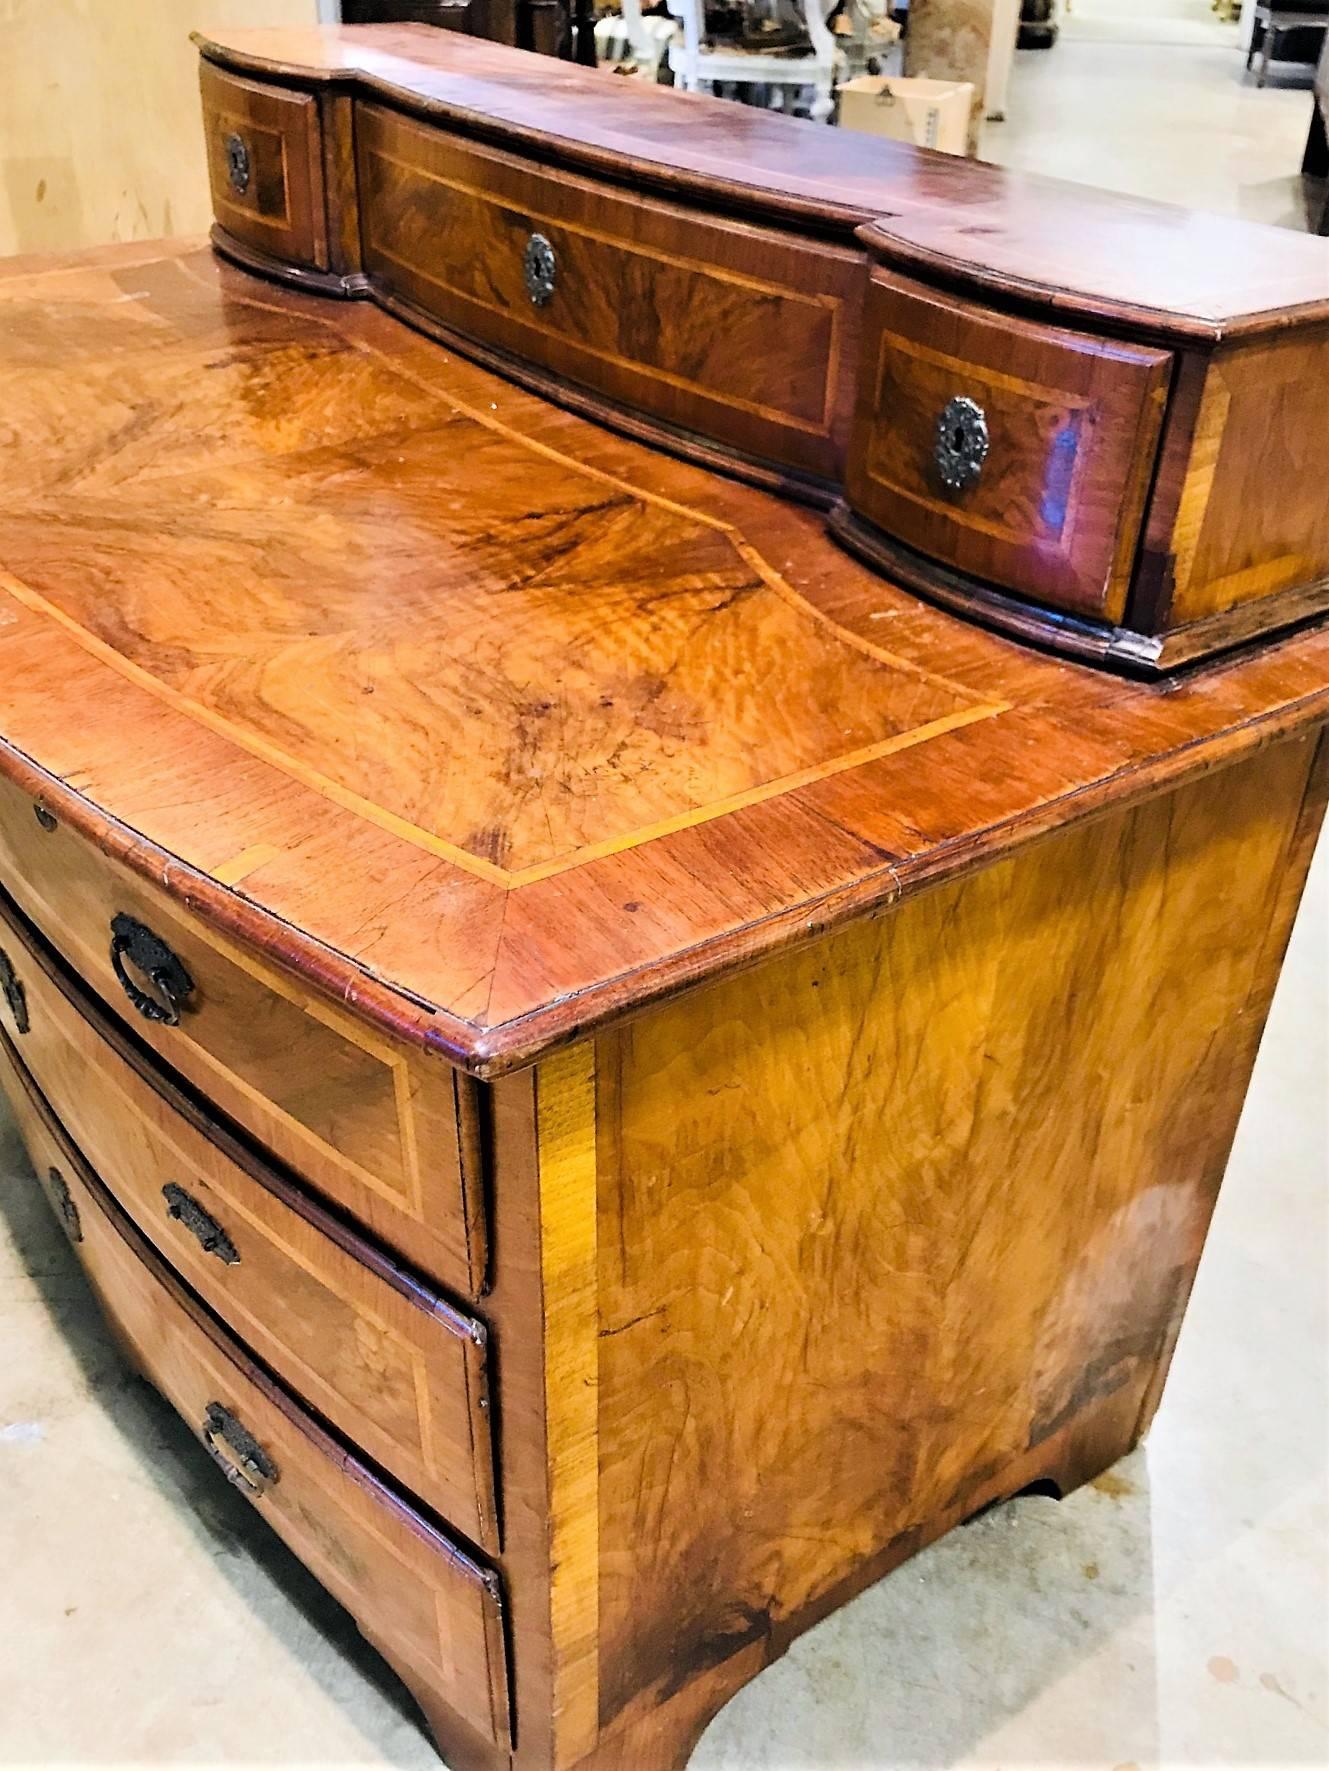 Scarce diminutive 18th century German three-drawer commode with shaped riser inset with smaller drawers.

This fabulous piece handcrafted of walnut banded veneer, satinwood string inlay and burled walnut panels. The drawers with fancy hand-wrought